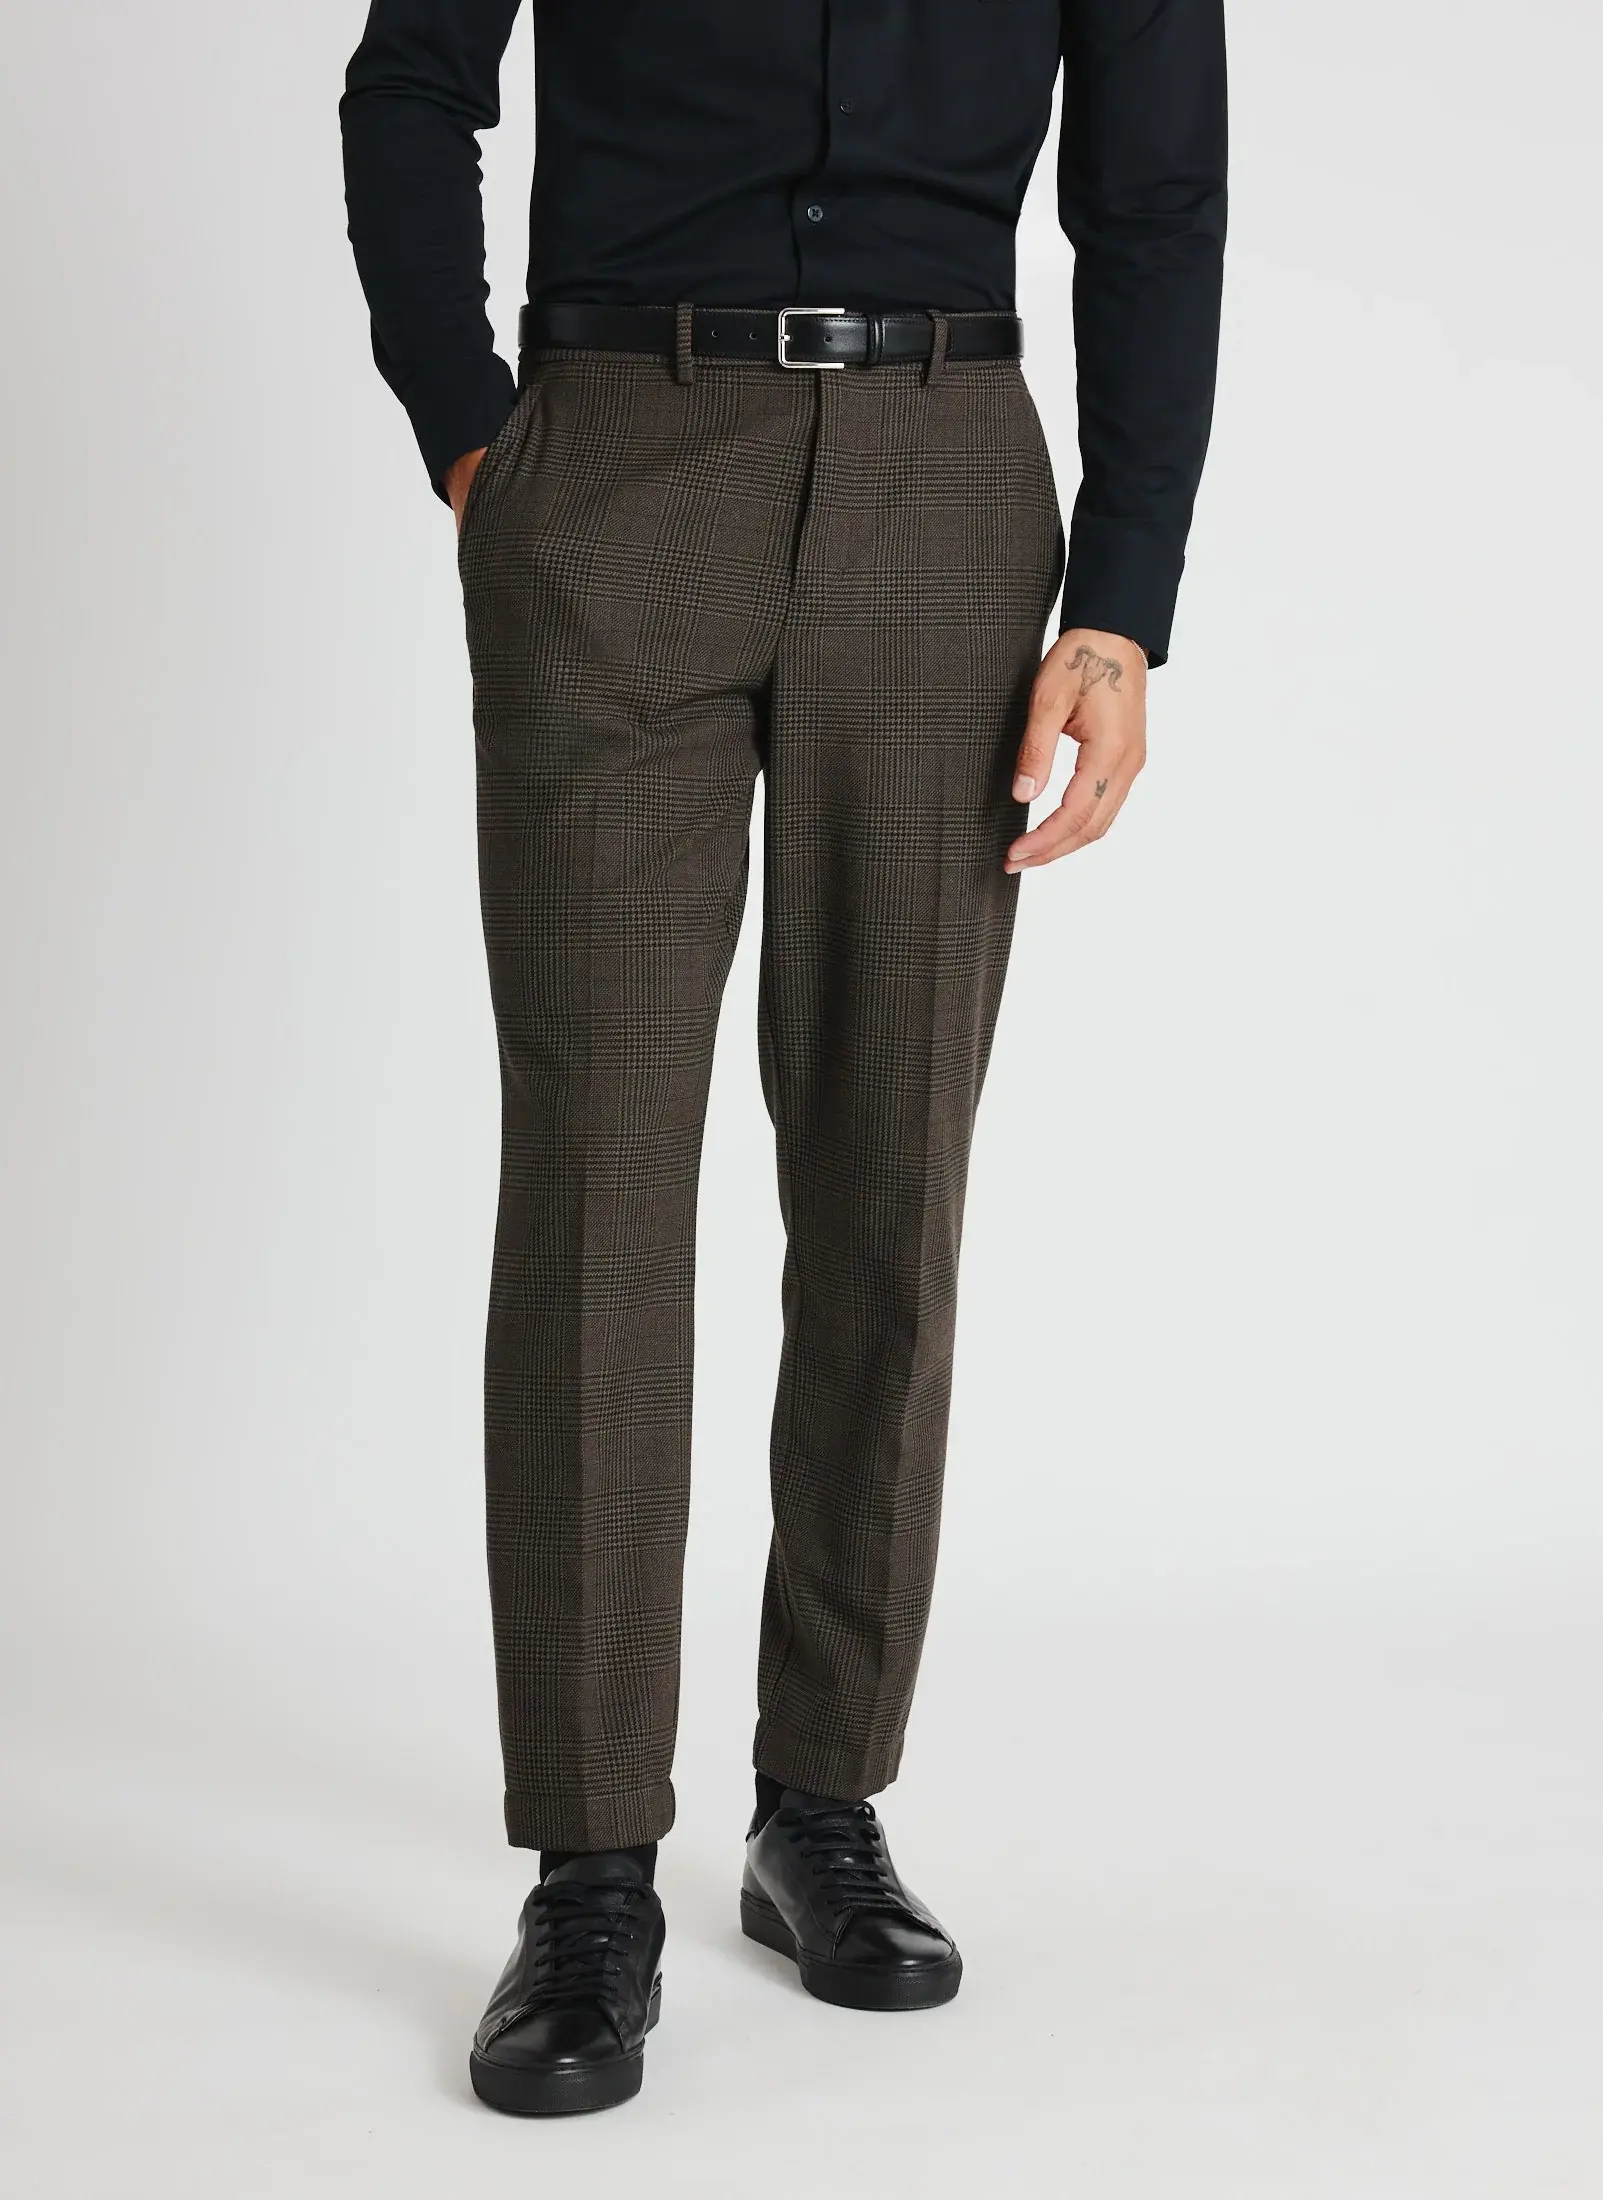 Kit And Ace Recycled Suiting Standard Trousers. 1